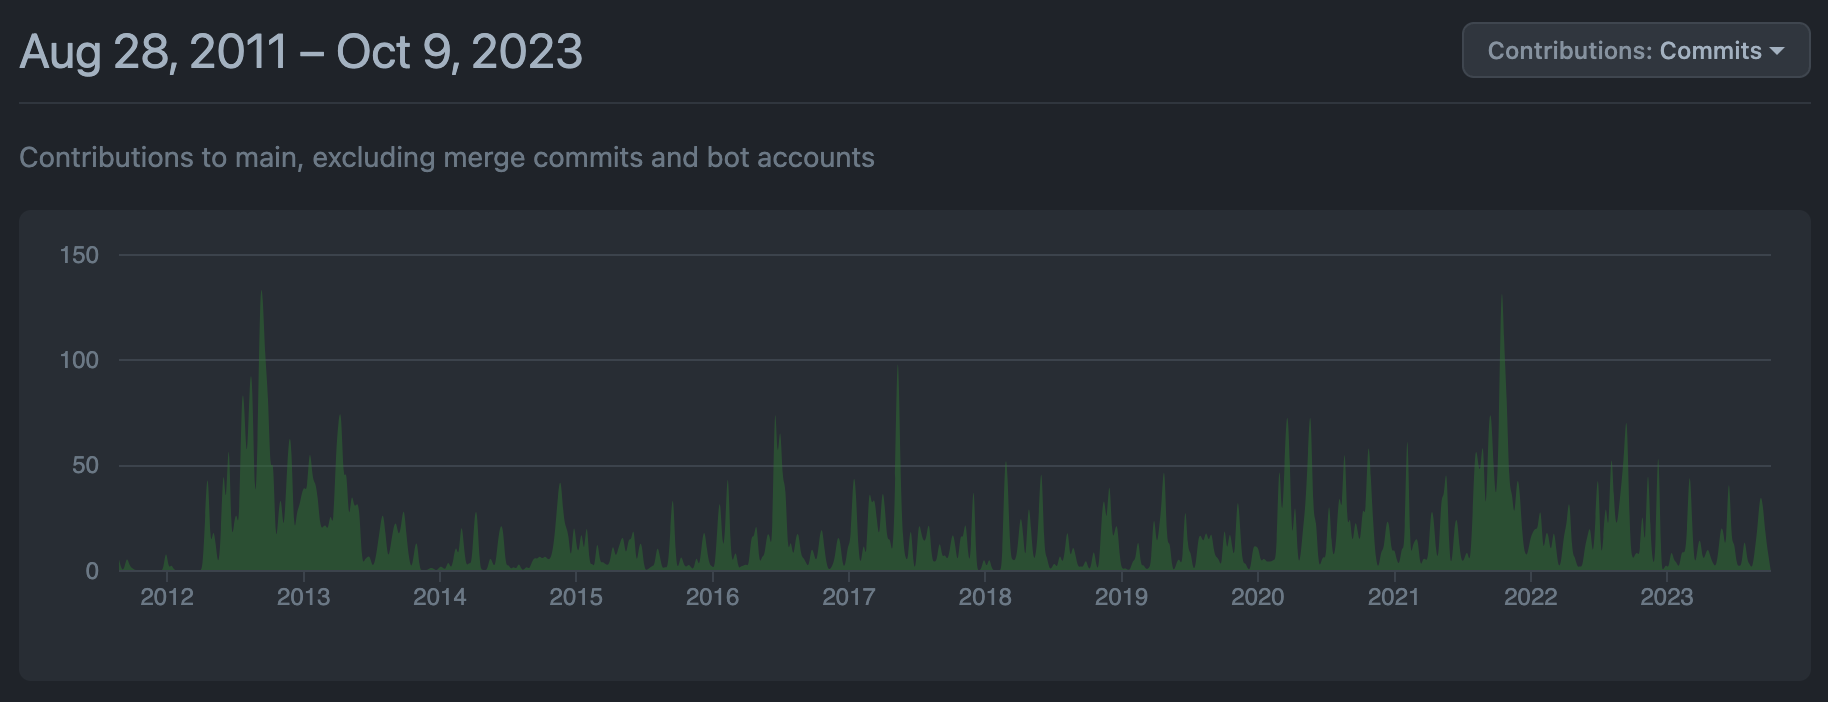 GitHub contribution graph that shows the total number of commits over time from August 28th, 2011 to October 9th, 2023.